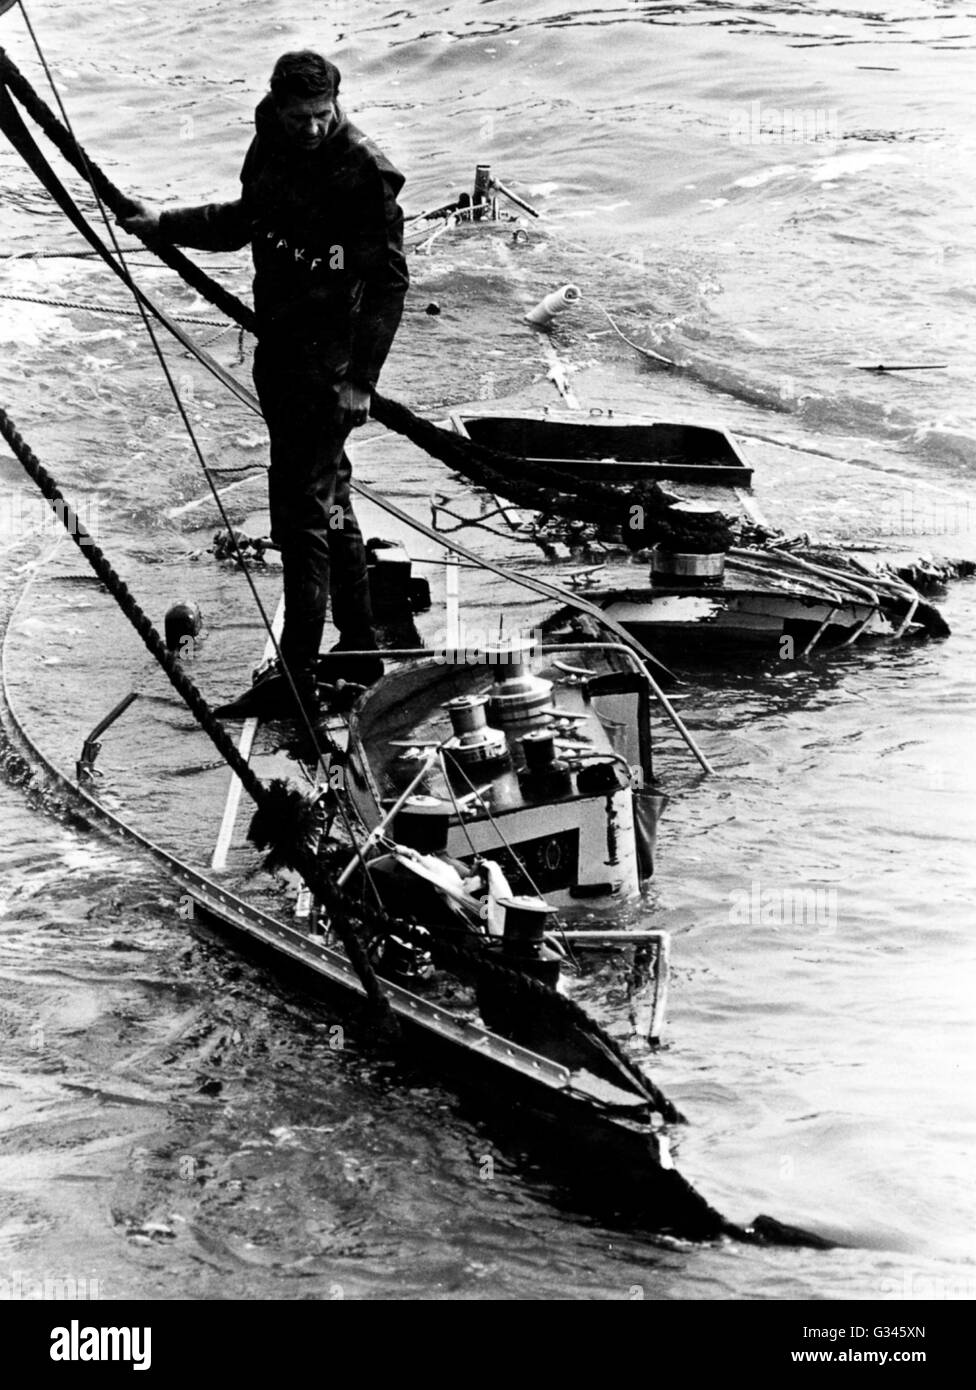 AJAX NEWS PHOTOS - 10TH SEPTEMBER,1974. SHOREHAM, ENGLAND. - WRECK SALVAGED - 741009/741109/GR1. A DIVER FROM THE SALVAGE BARGE SURVEYS ALL THAT REMAINS OF THE HULL OF MR HEATH'S YACHT MORNING CLOUD AS SHE WAS BROUGHT INTO SHOREHAM HARBOUR. THE £45,000 OCEAN RACER, THE THIRD WHICH MR HEATH HAS OWNED, WAS WRECKED IN A GALE OFF THE SUSSEX COAST ON SEPT 2ND,1974. TWO MEN LOST THEIR LIVES IN THE TRAGEDY. A YACHT SURVEYOR AT THE SCENE IN SHOREHAM SAID THE BOAT WAS A TOTAL LOSS. MOST OF THE STARBOARD SIDE WAS MISSING AND THE MAST AS WELL AS THE ENGINE HAD GONE. PHOTO:JONATHAN EASTLAND/AJAX  REF:7410 Stock Photo